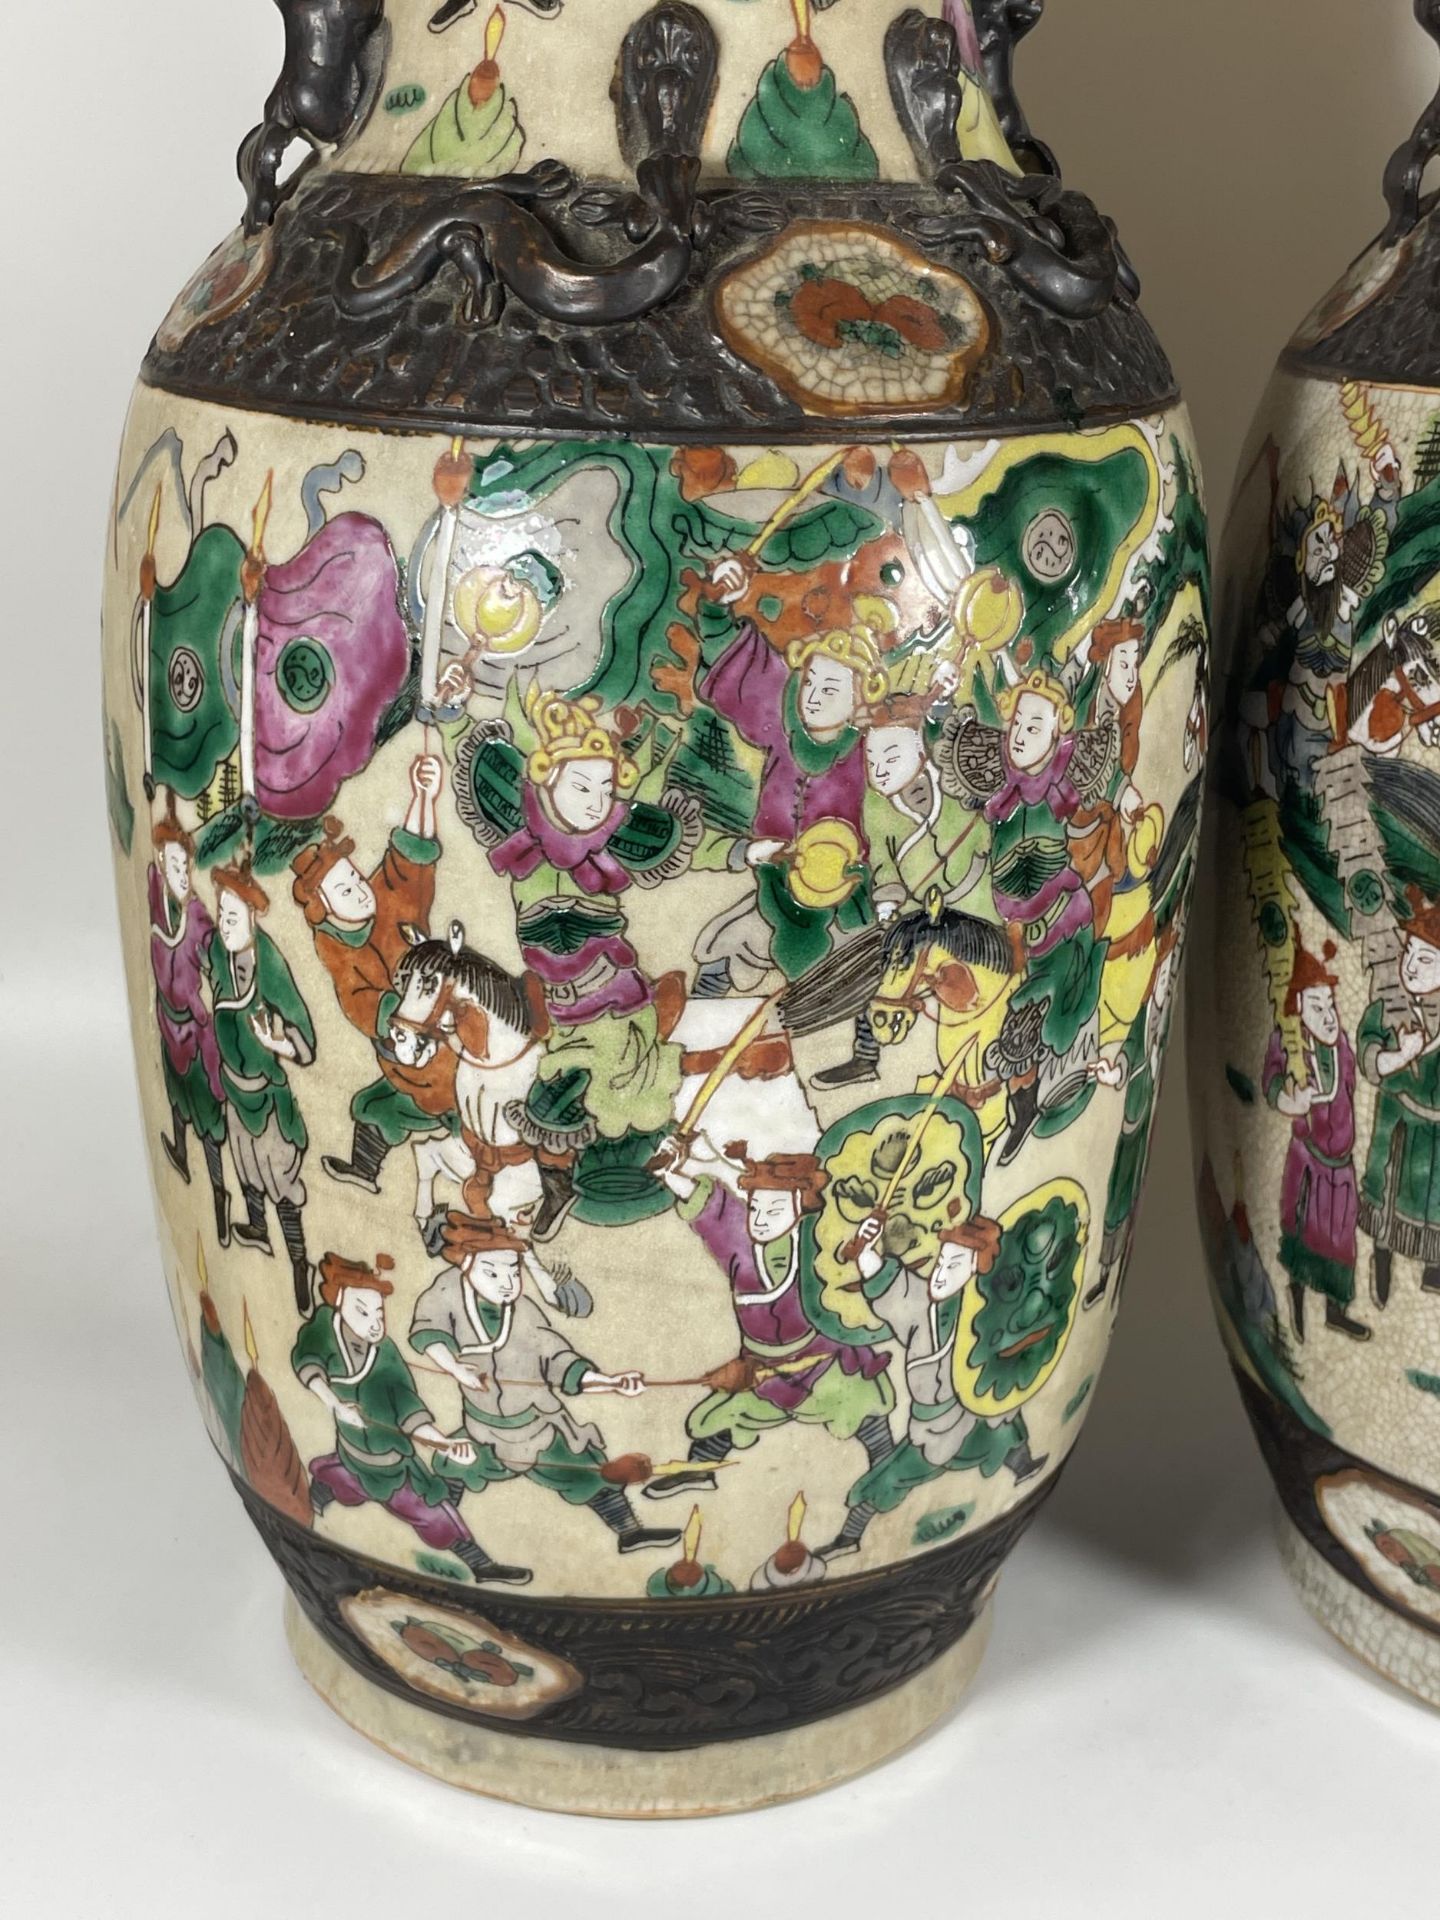 A HUGE PAIR OF CHINESE LATE 19TH / EARLY 20TH CENTURY CRACKLE GLAZE PORCELAIN VASES DEPICTING - Image 2 of 8